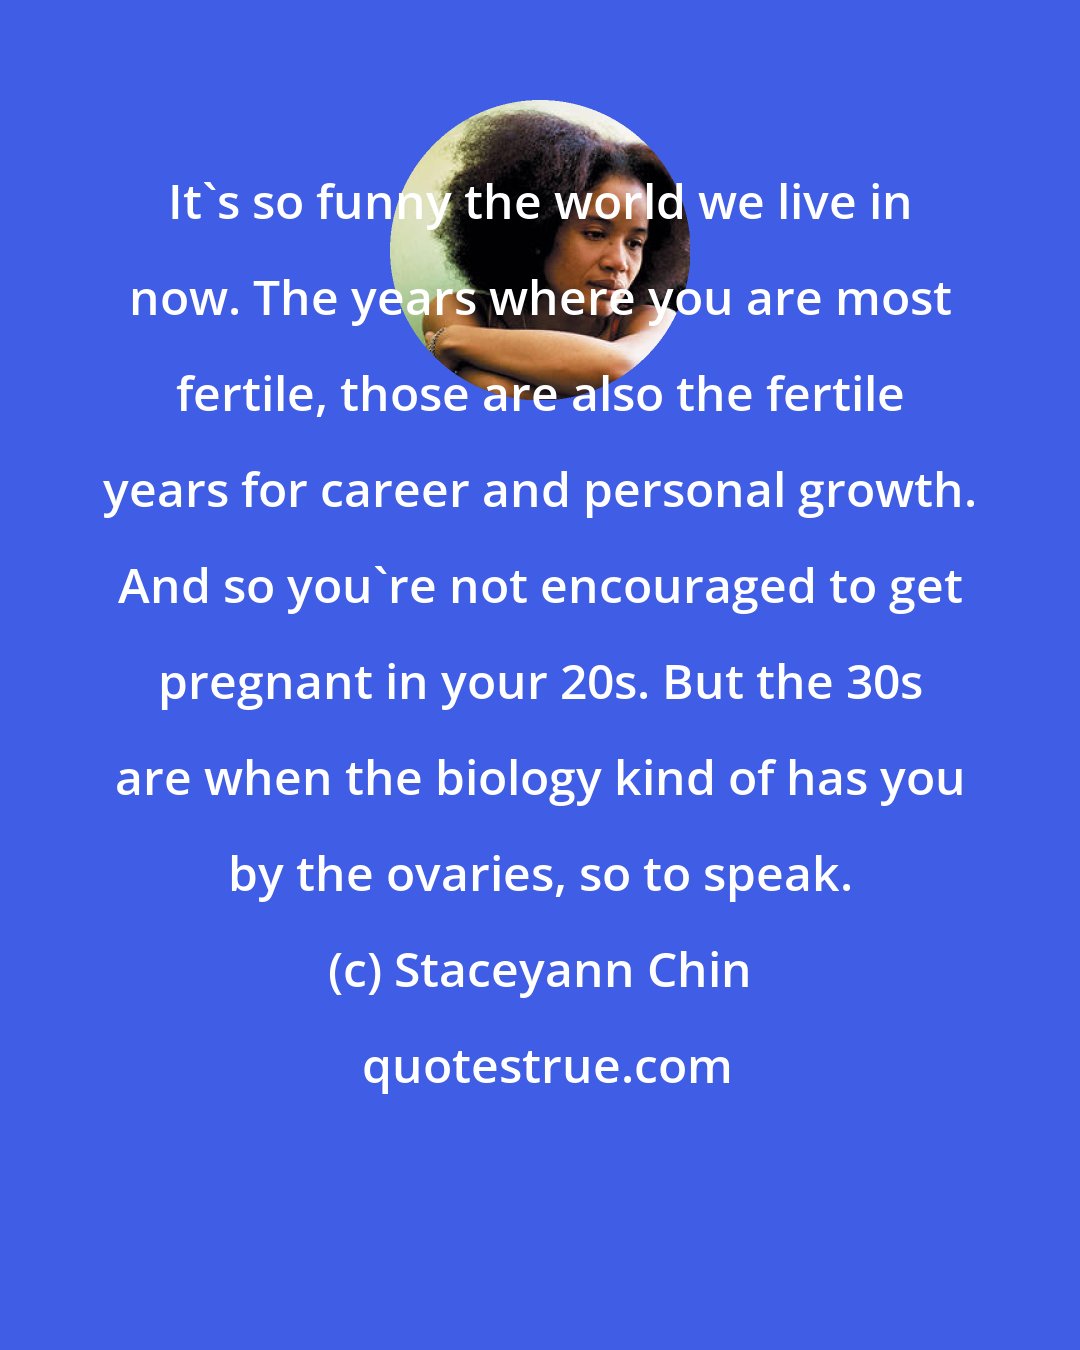 Staceyann Chin: It's so funny the world we live in now. The years where you are most fertile, those are also the fertile years for career and personal growth. And so you're not encouraged to get pregnant in your 20s. But the 30s are when the biology kind of has you by the ovaries, so to speak.